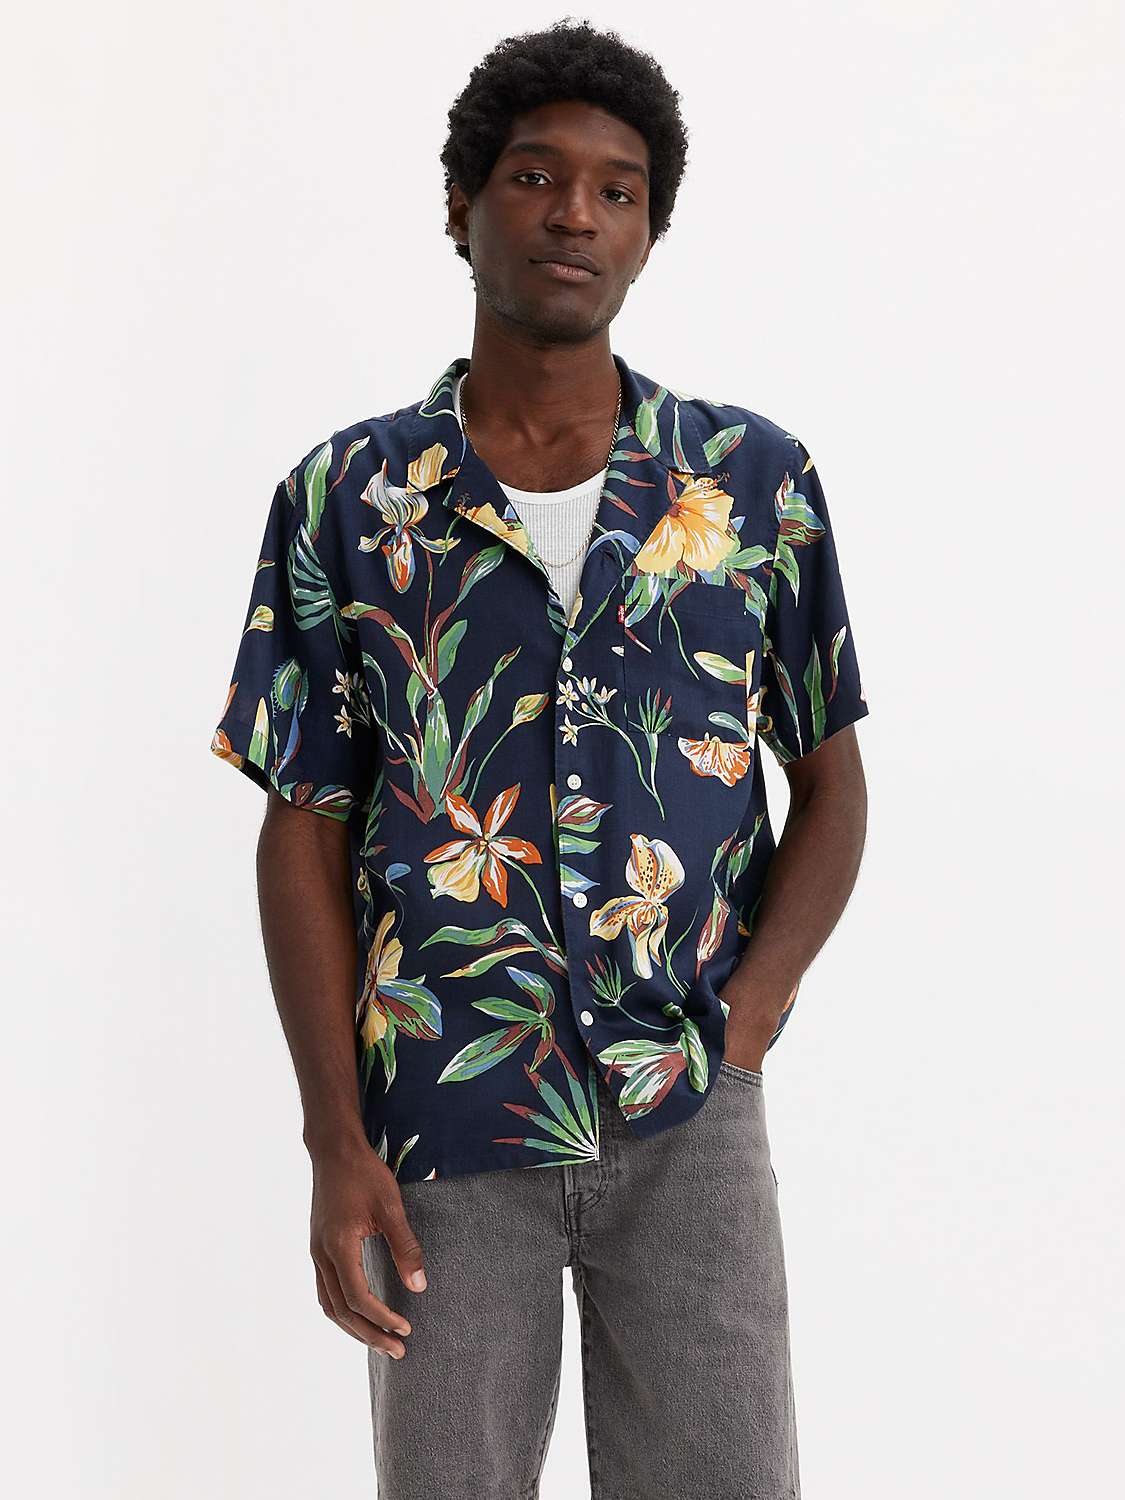 Buy Levi's The Sunset Camp Shirt, Navy/Multi Online at johnlewis.com